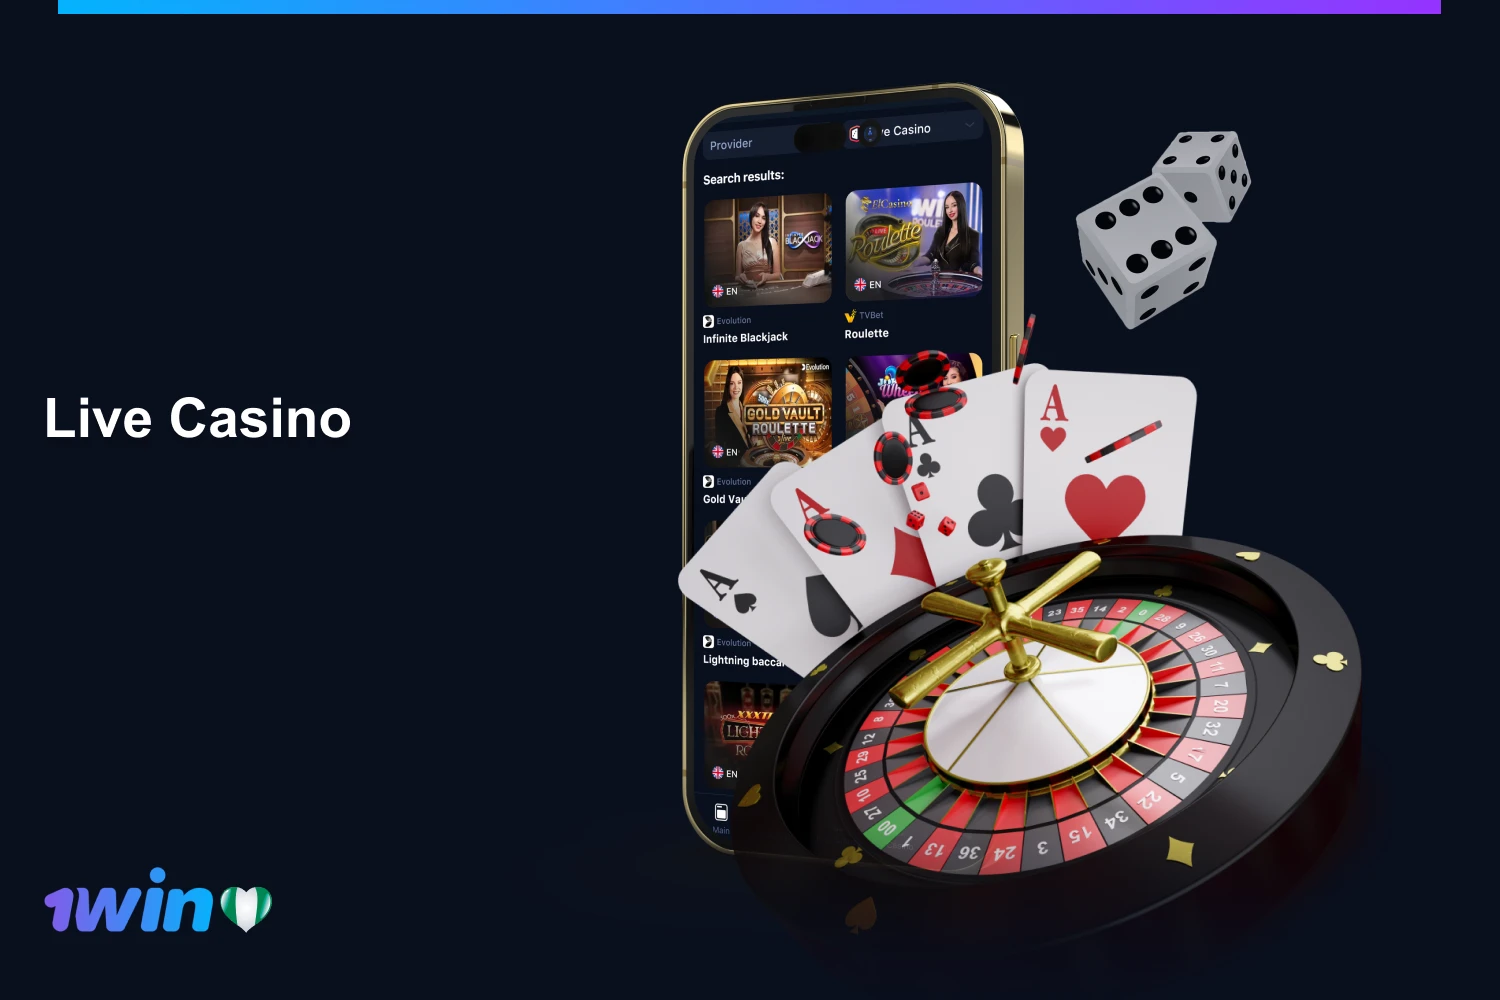 By choosing the official 1win site, players from Nigeria get access to 600+ live casino games